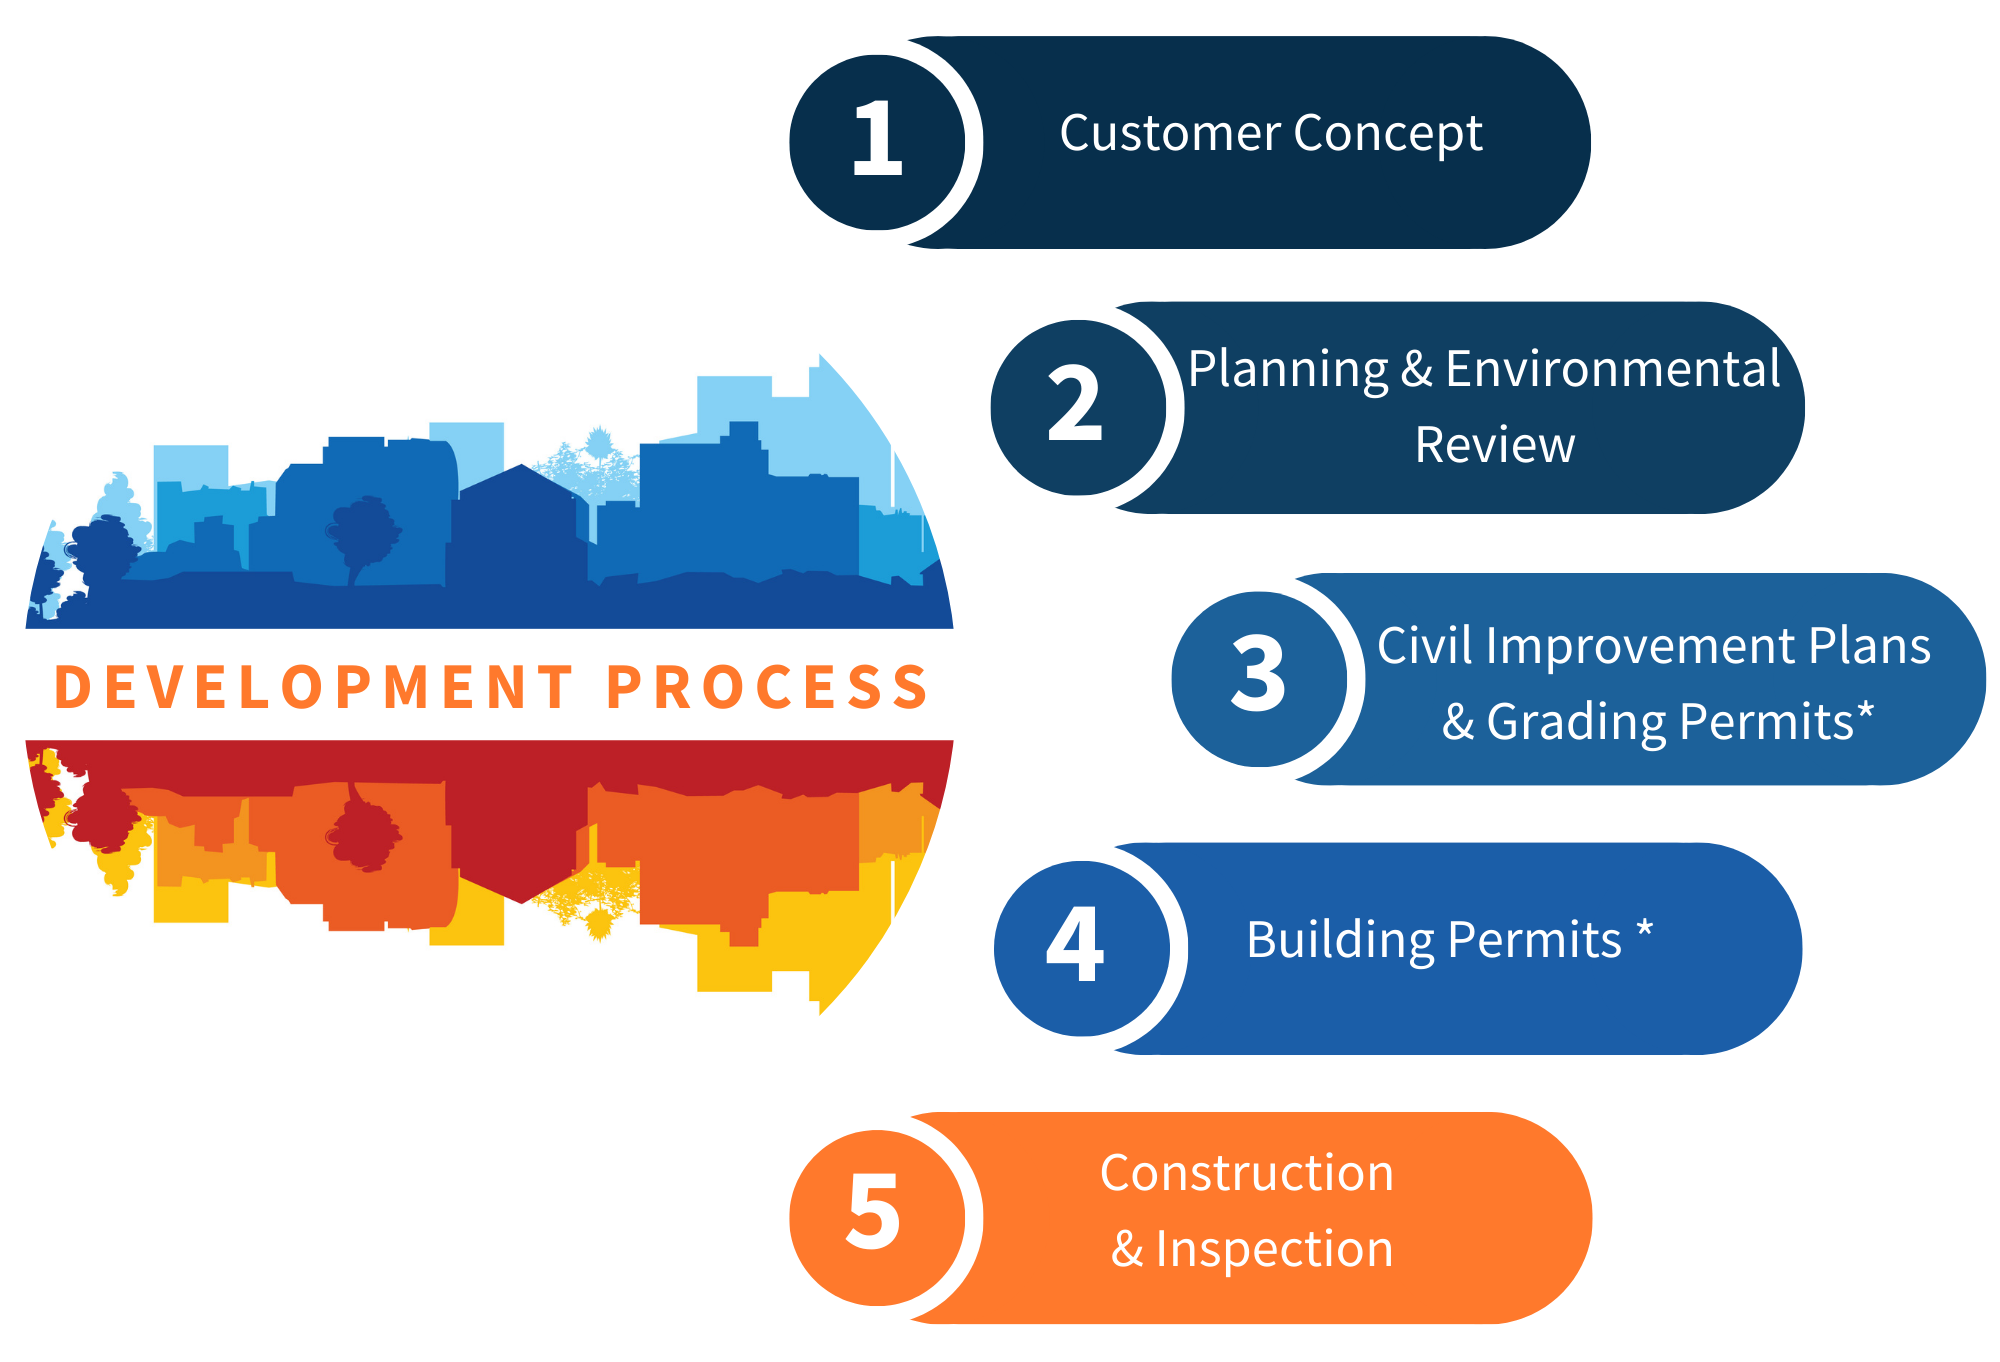 Development Process: Step 1 Customer Concept. Step 2 - Planning & Environmental Review. Step 3 - Civil Improvements and Grading Permits. Step 4 Building Permits. Step 5. Construction & Inspection.